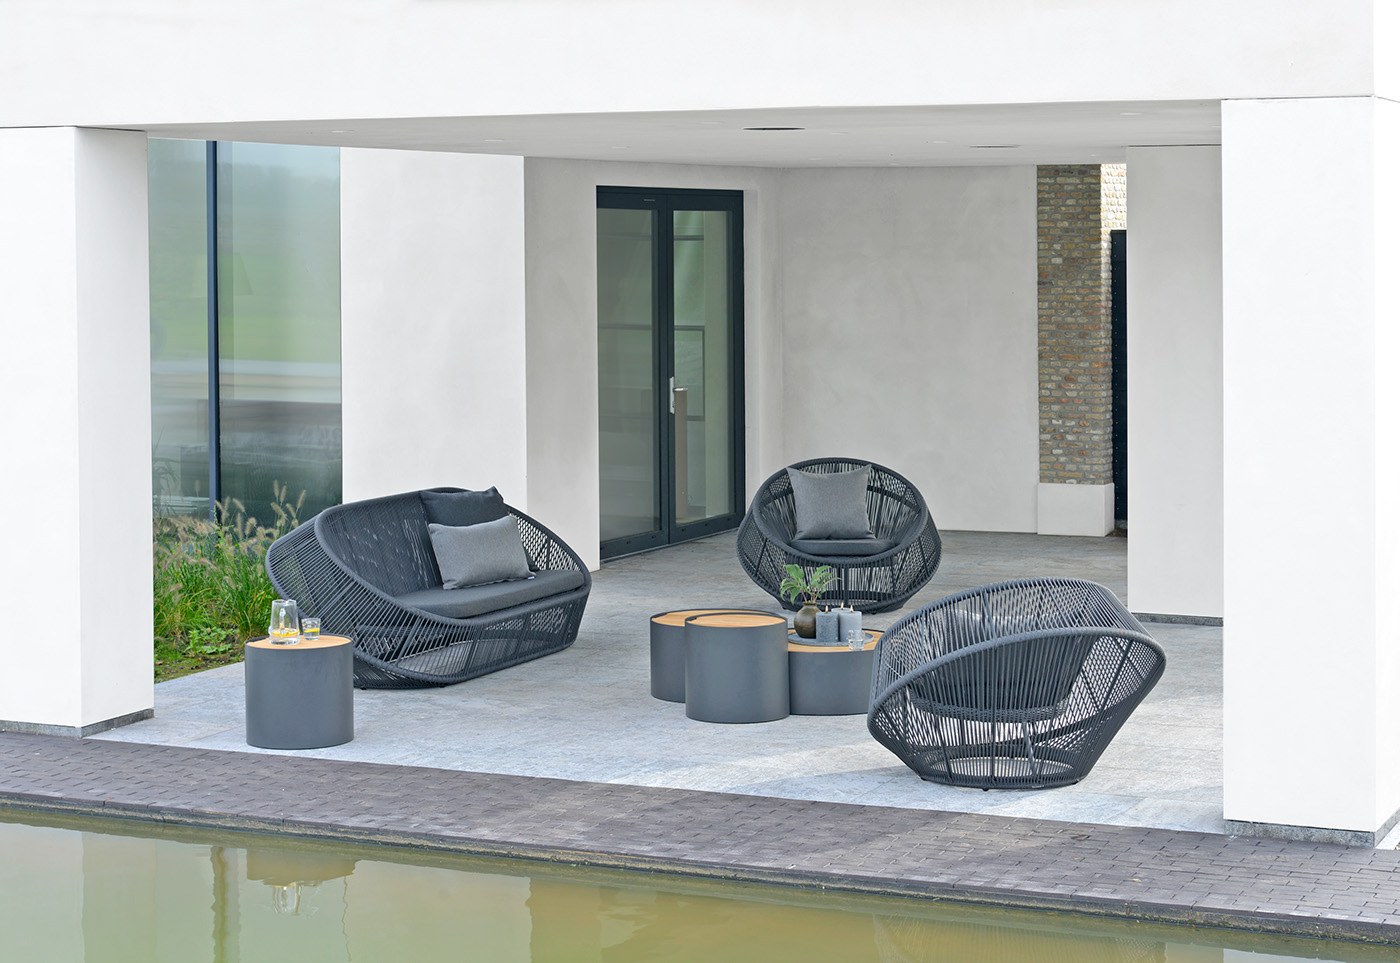 gardenfurniture furniture design  product design  industrial design  outdoor furniture Design furniture WOVEN STRUCTURES 